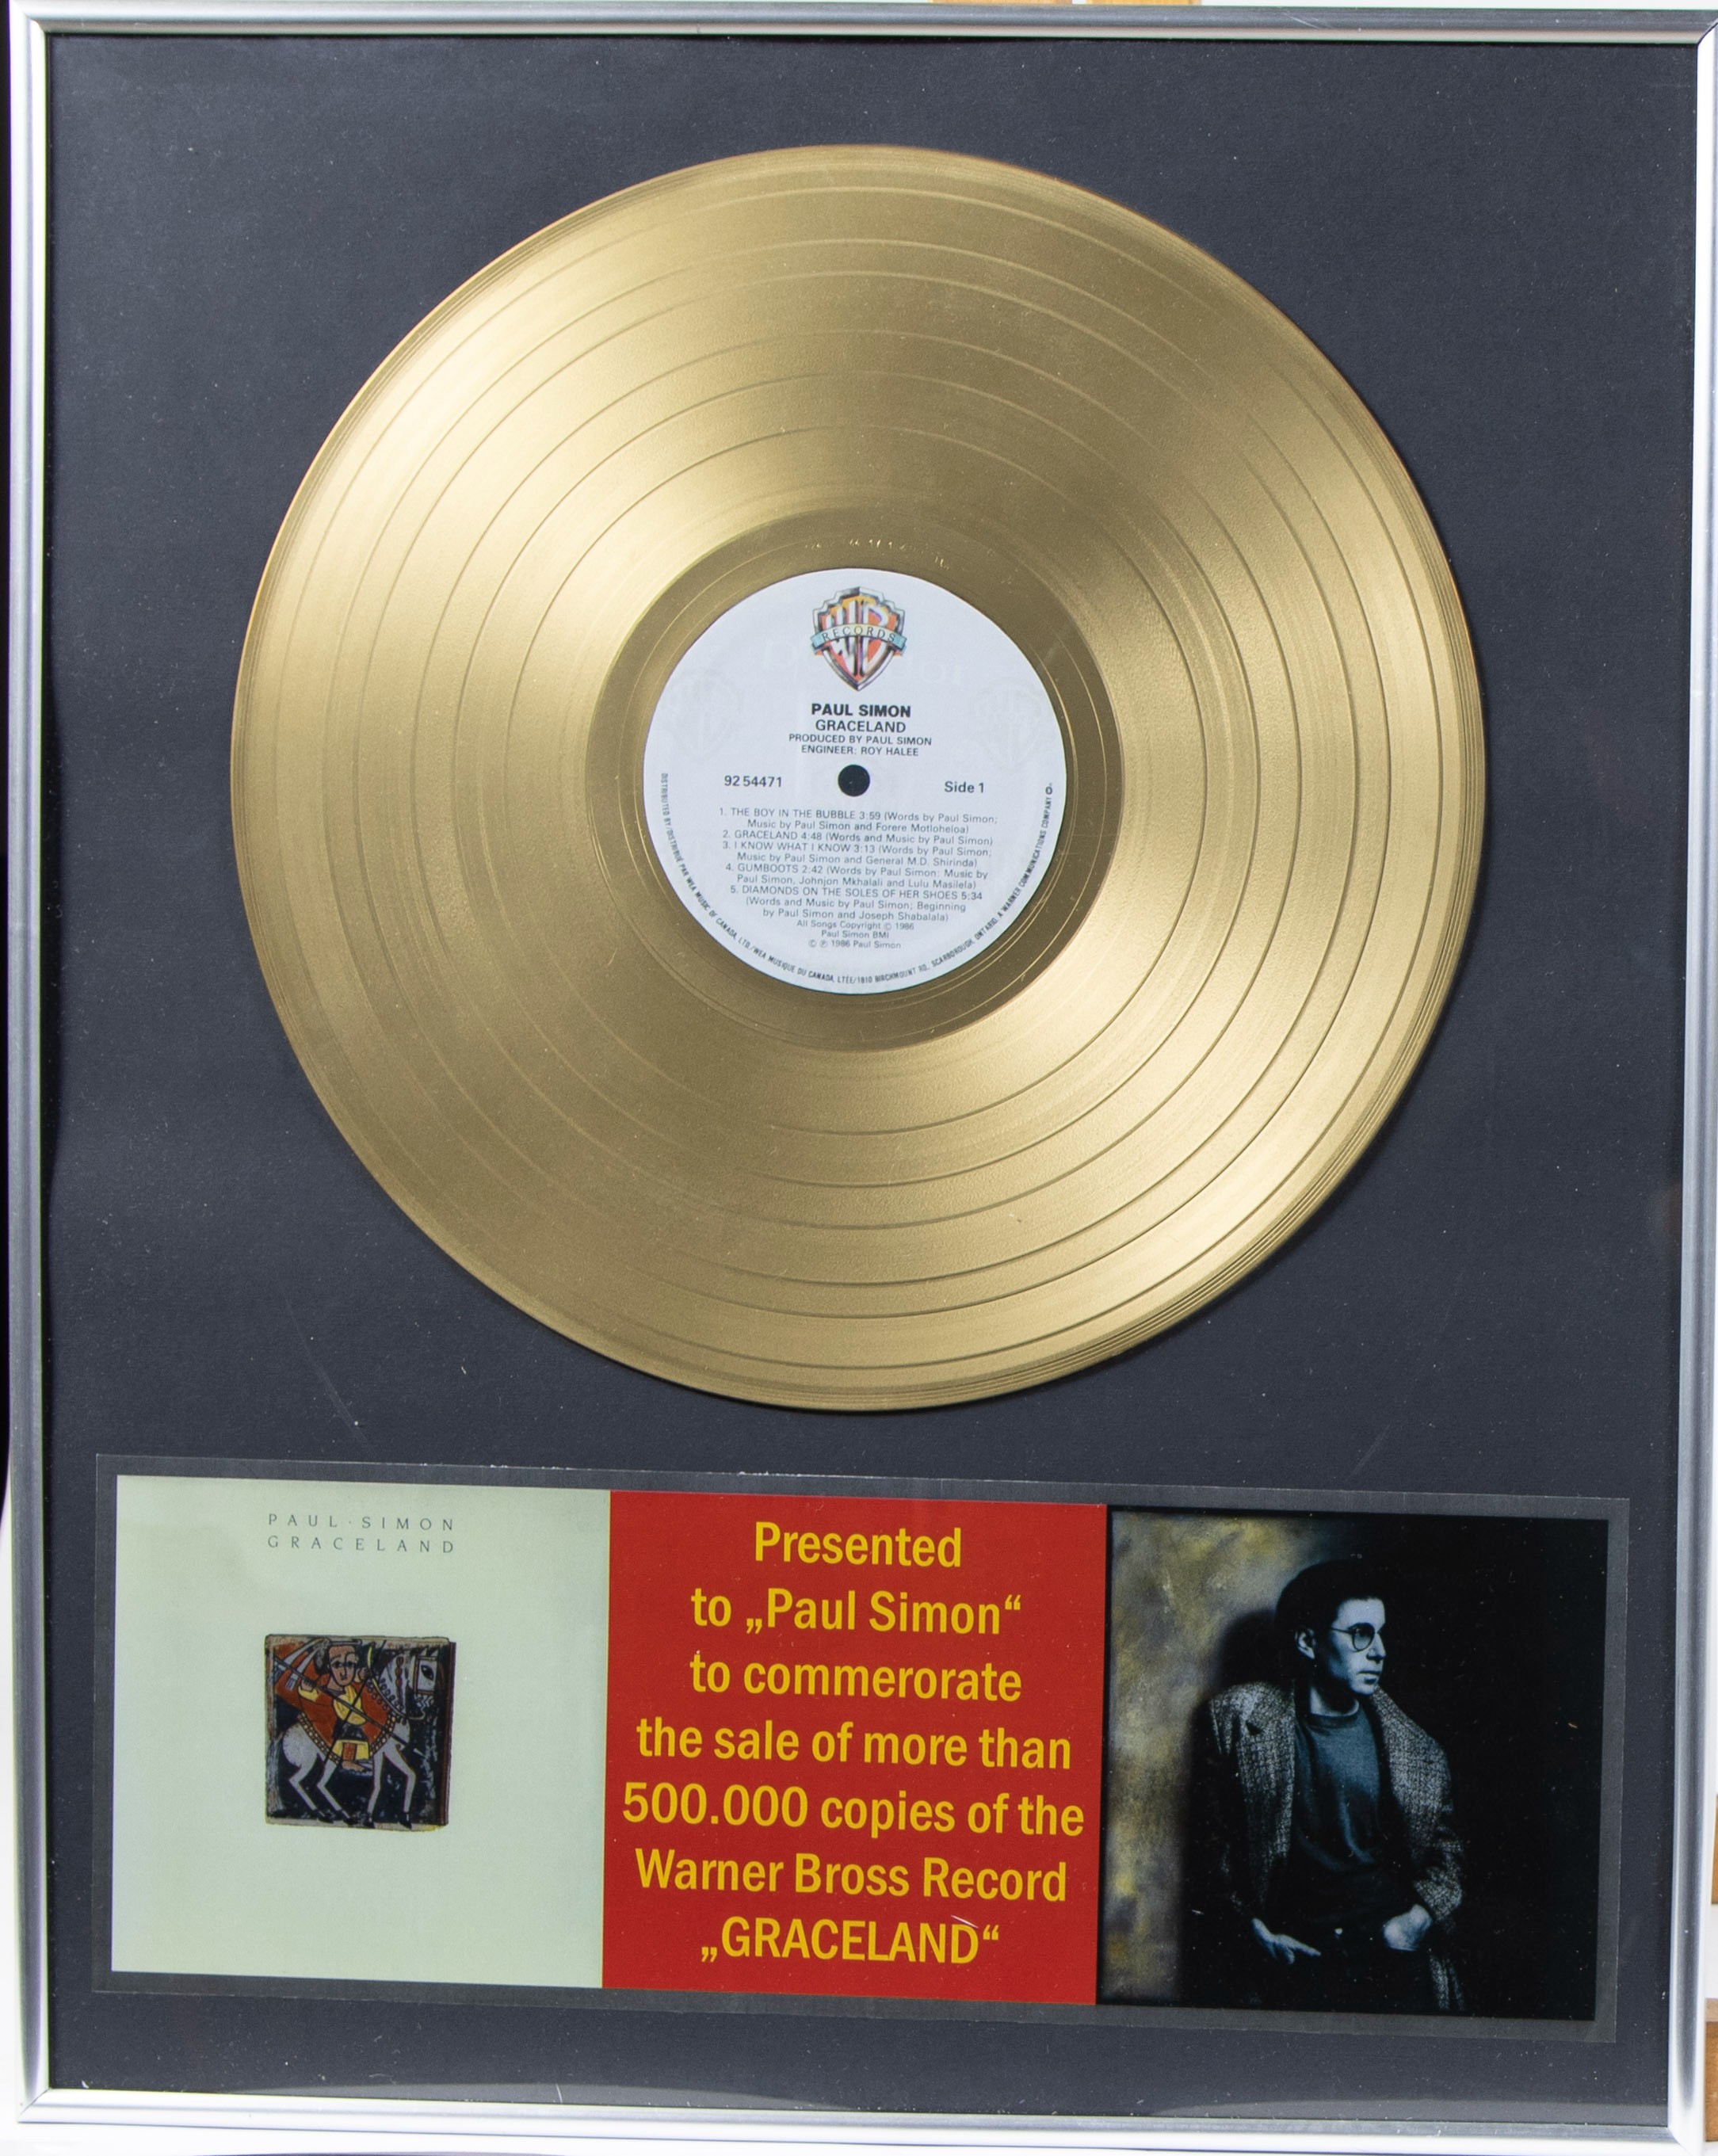 Paul Simon commemorative LP 'Graceland', this is an iconic rare gold plated Record Award specially f